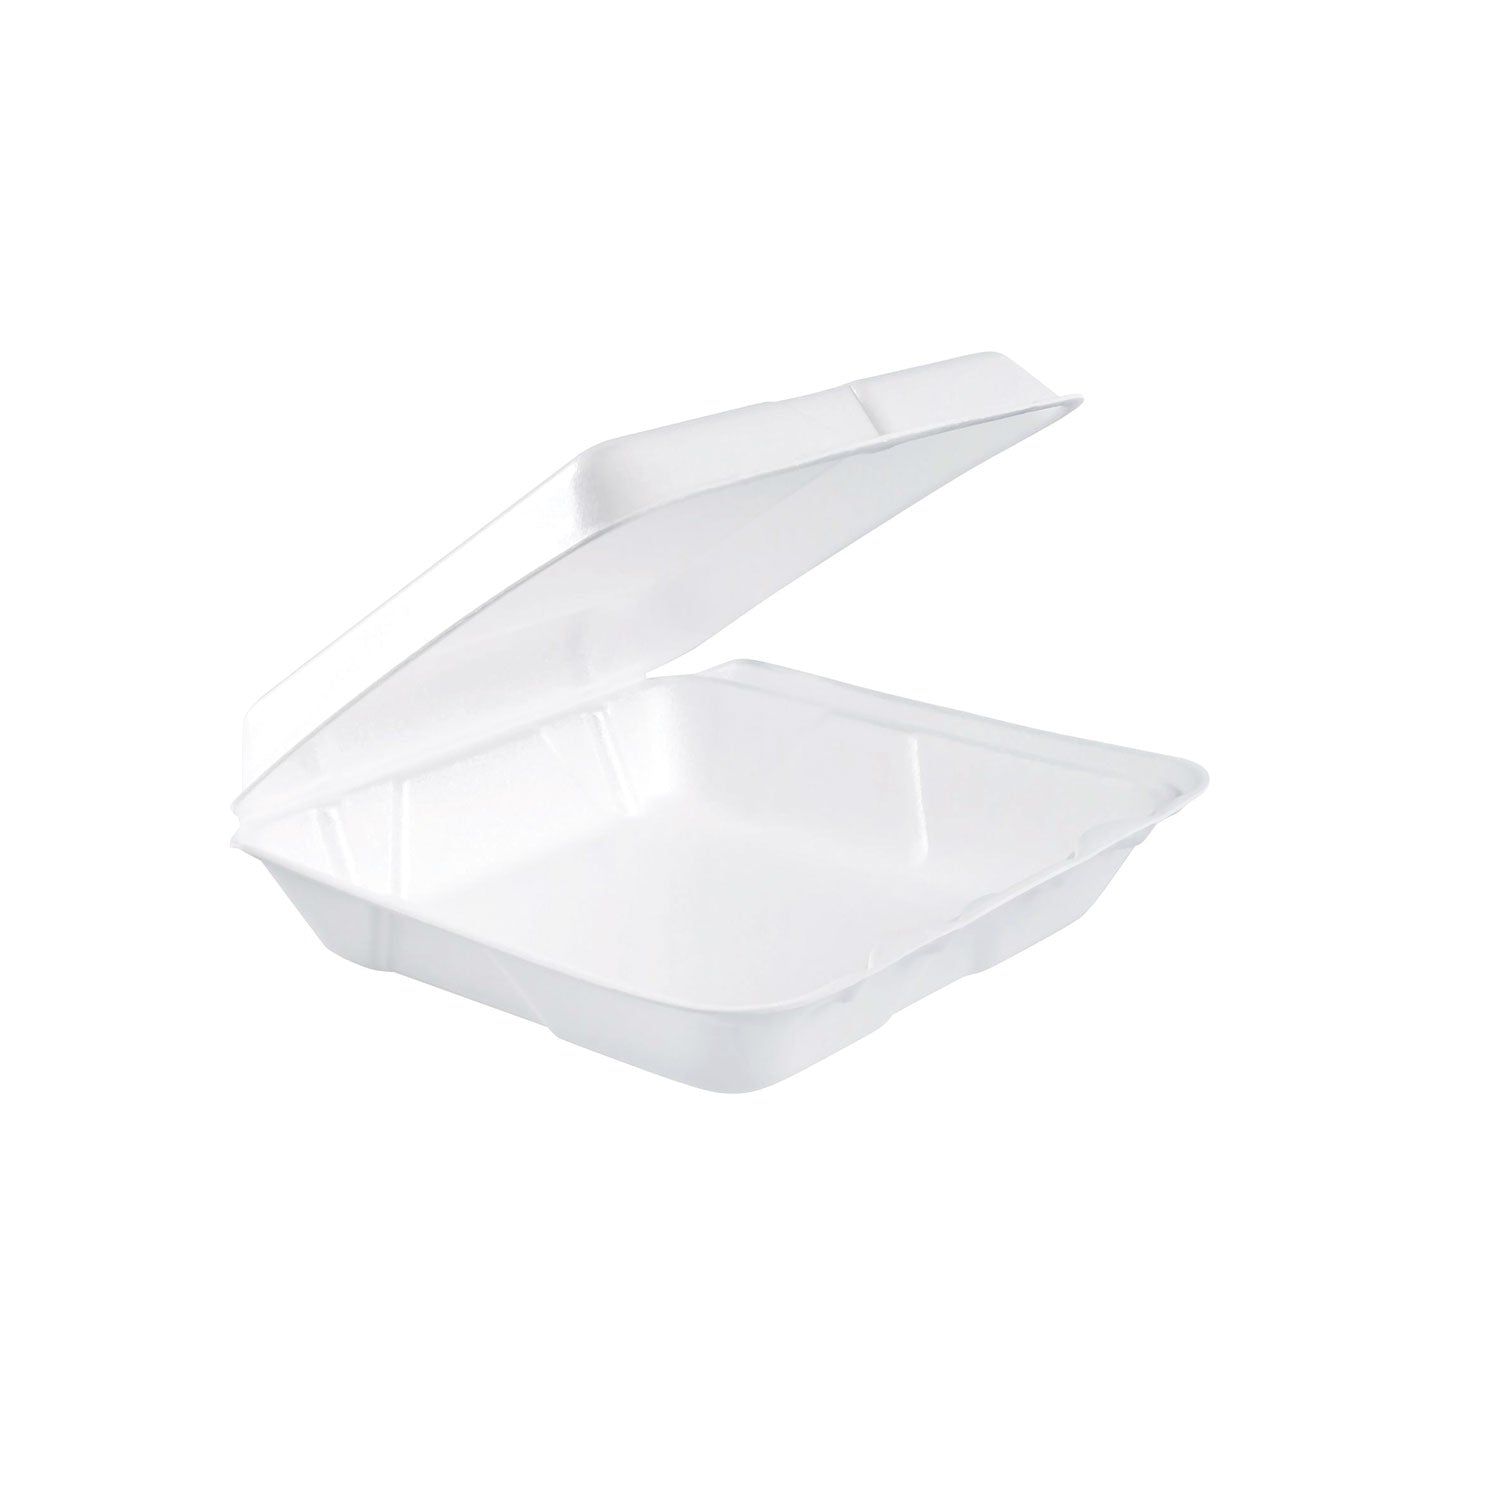 foam-hinged-lid-containers-75-x-8-x-22-white-200-carton_dcc80ht1r - 1